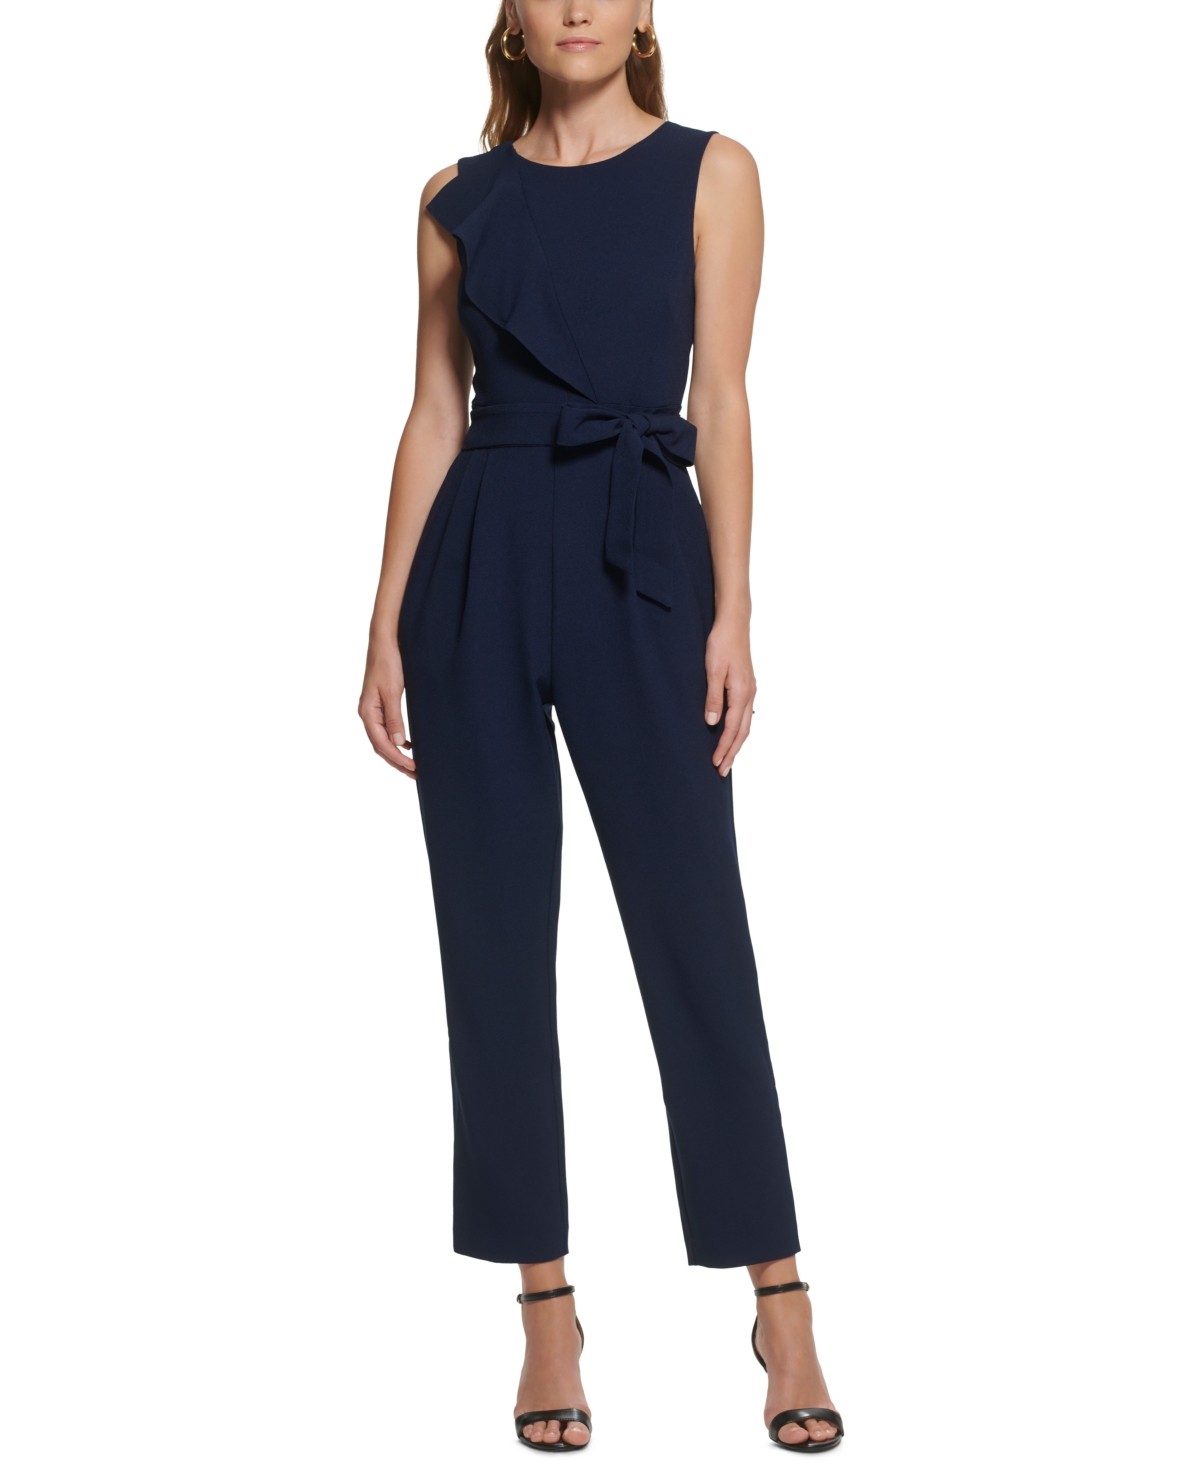 Petite Ruffled Belted Jumpsuit - Navy